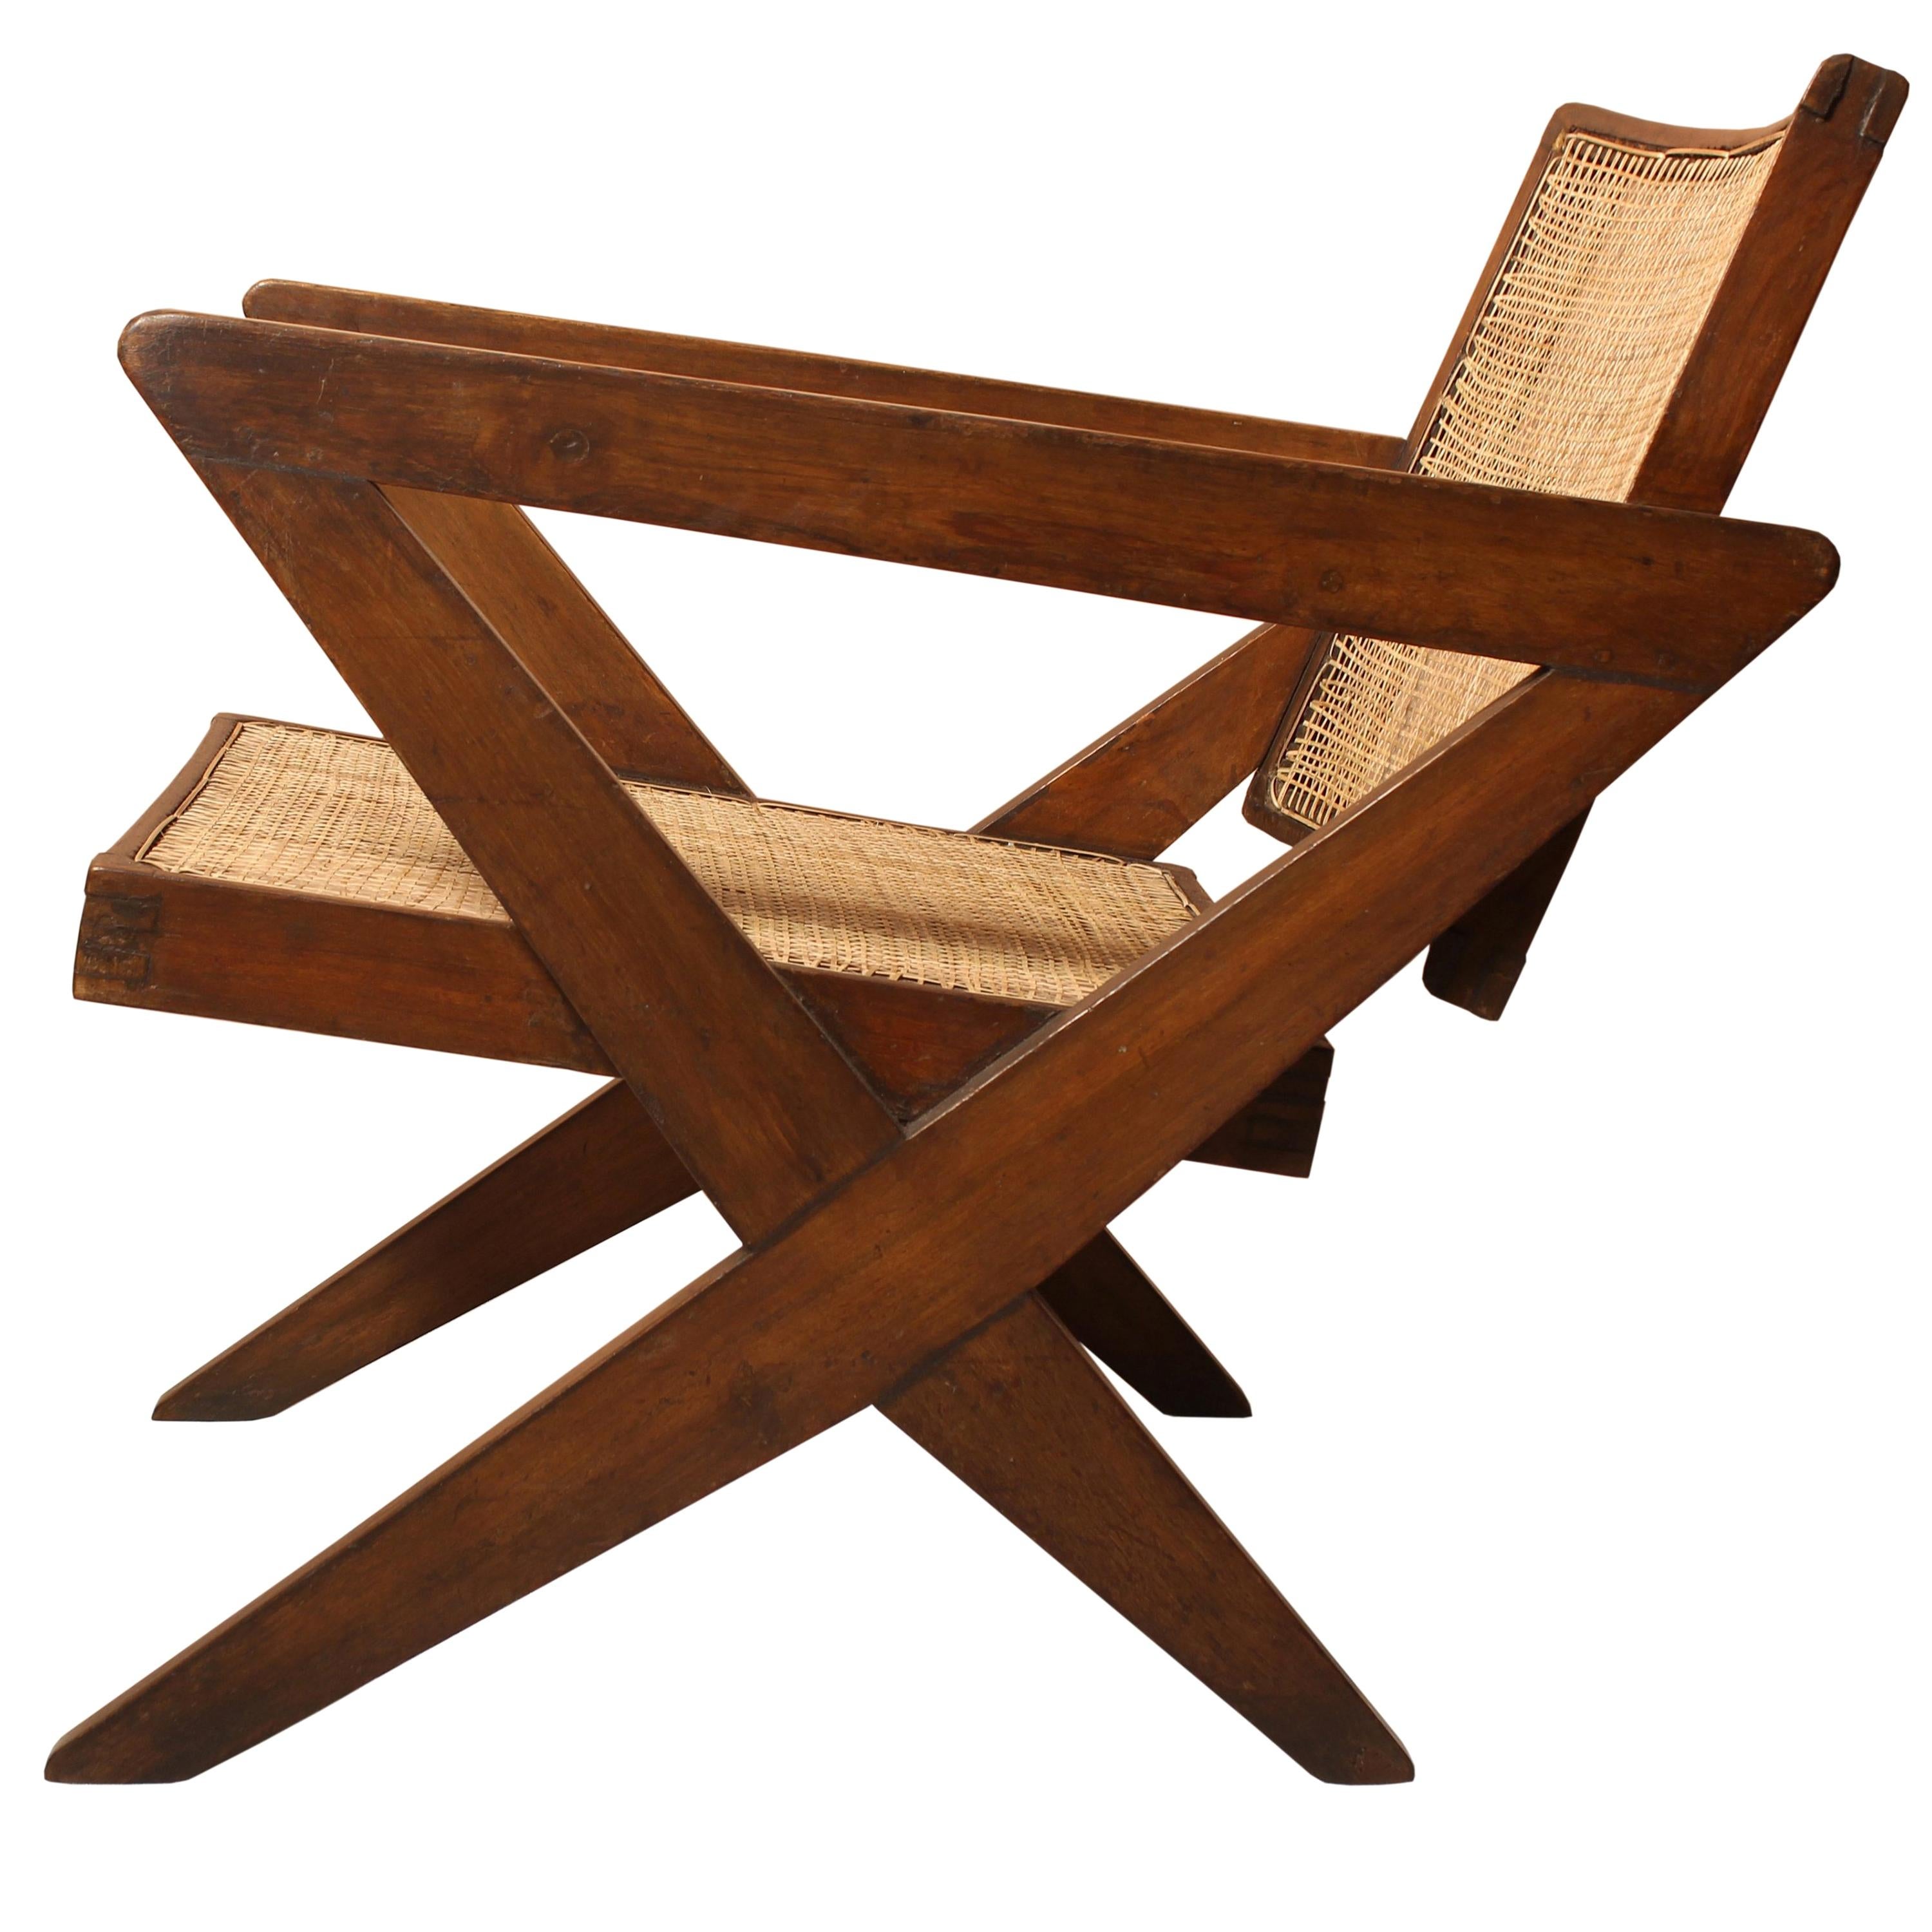 Pierre Jeanneret PJ-SI-45-A AUTHENTIC "X-Easy Armchair" from Chandigarh